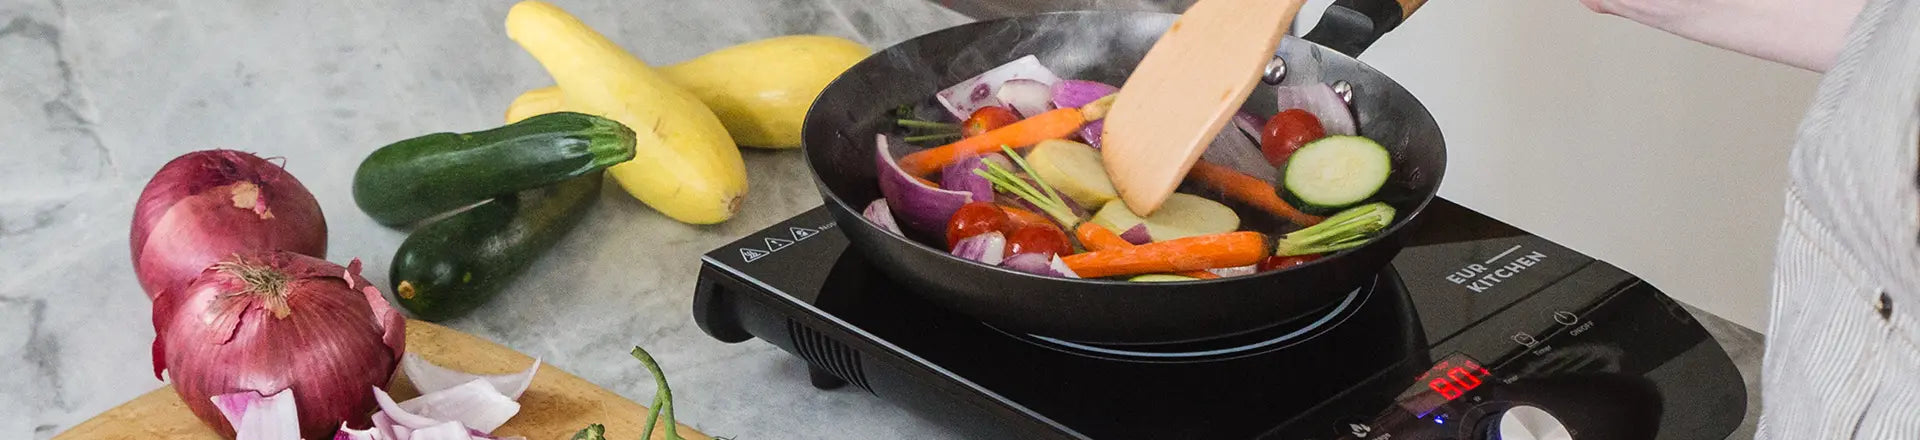 cooking veggies with non-stick pans